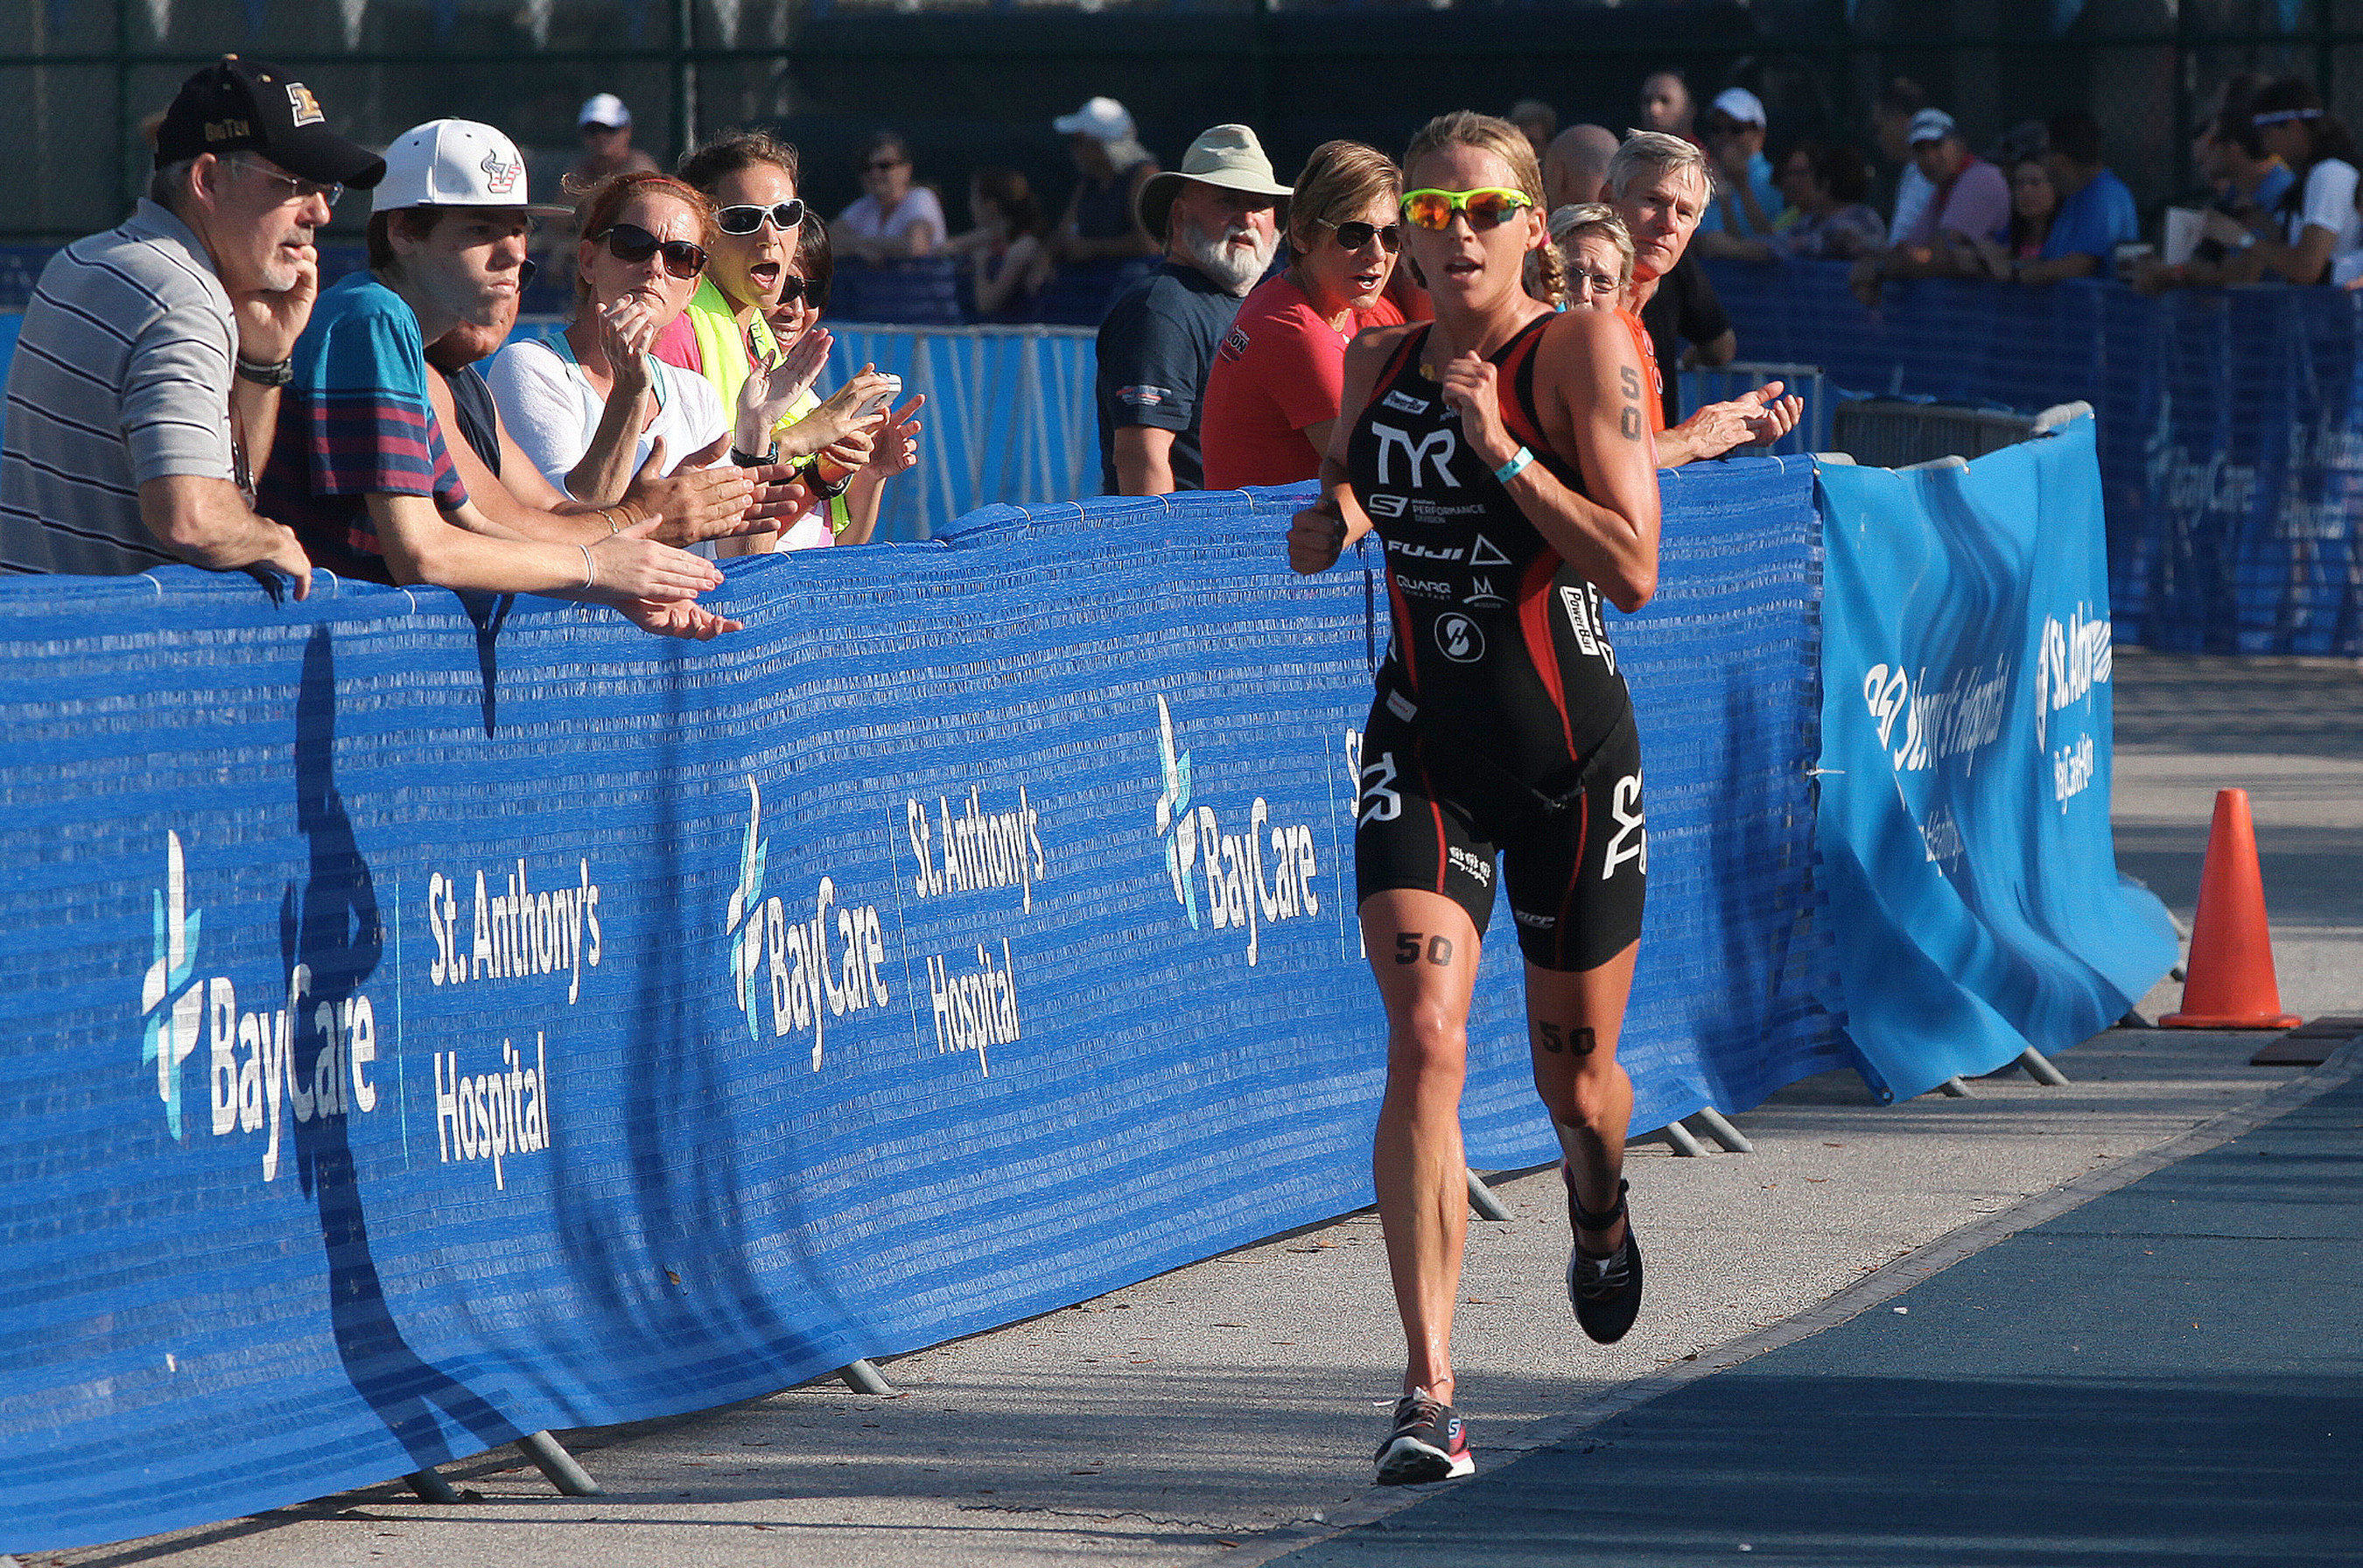 Courtesy of St. Anthony's Triathlon: Sarah Haskins makes her way to the finish line to win the professional women's division of the 2014 St. Anthony's Triathlon.